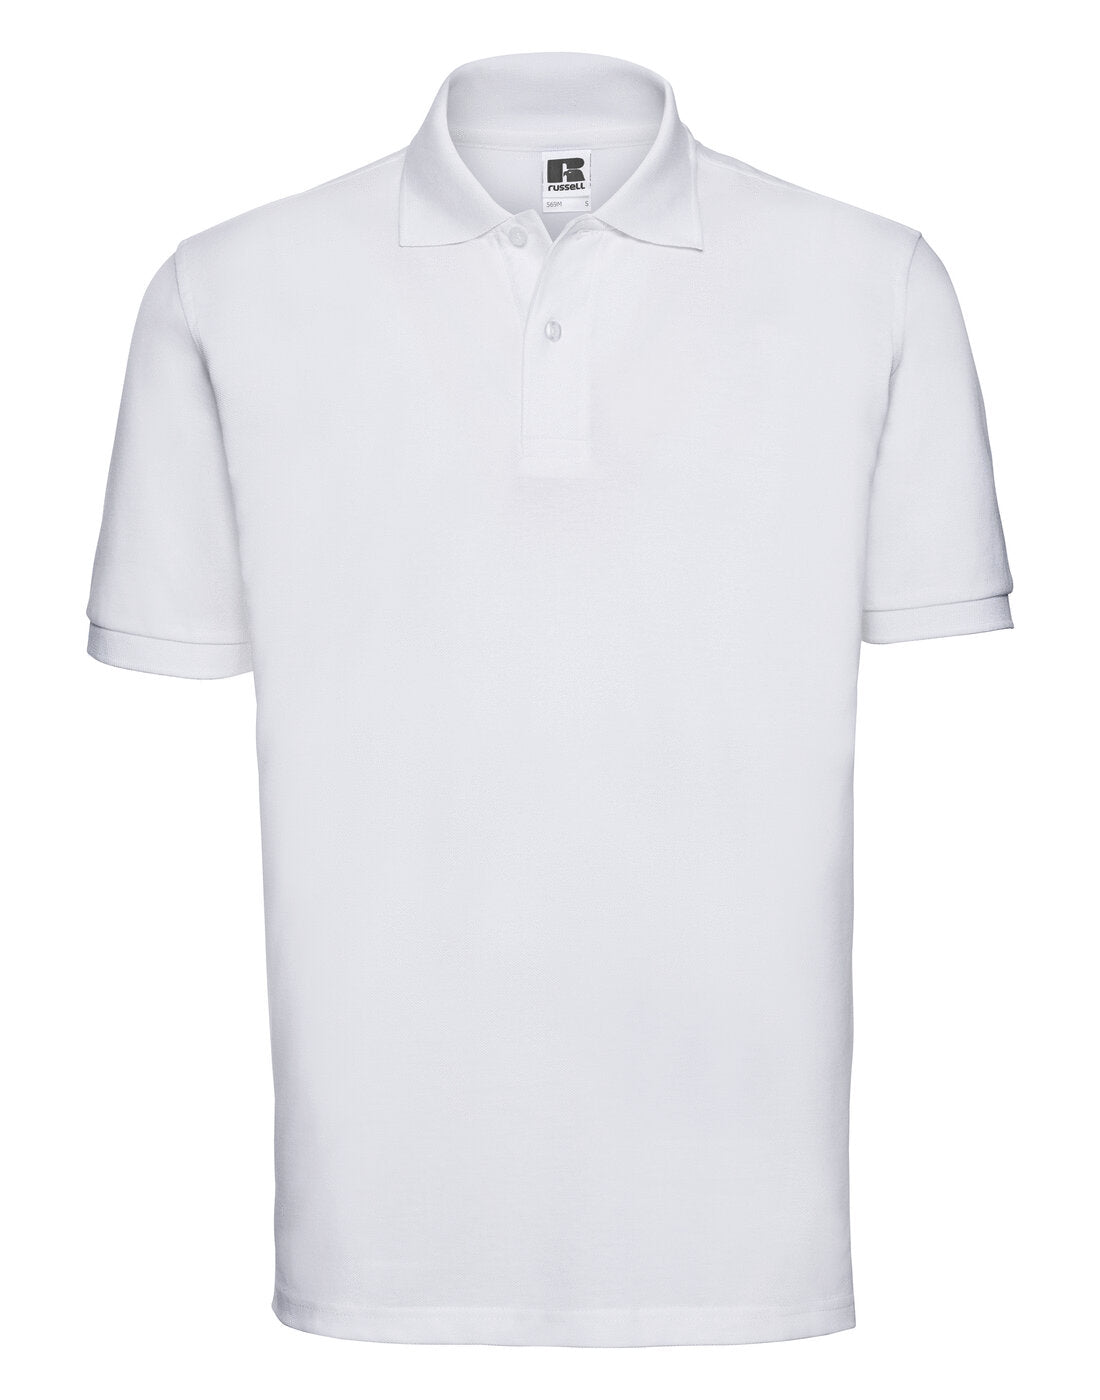 Russell Classic Cotton Polo - 569M White